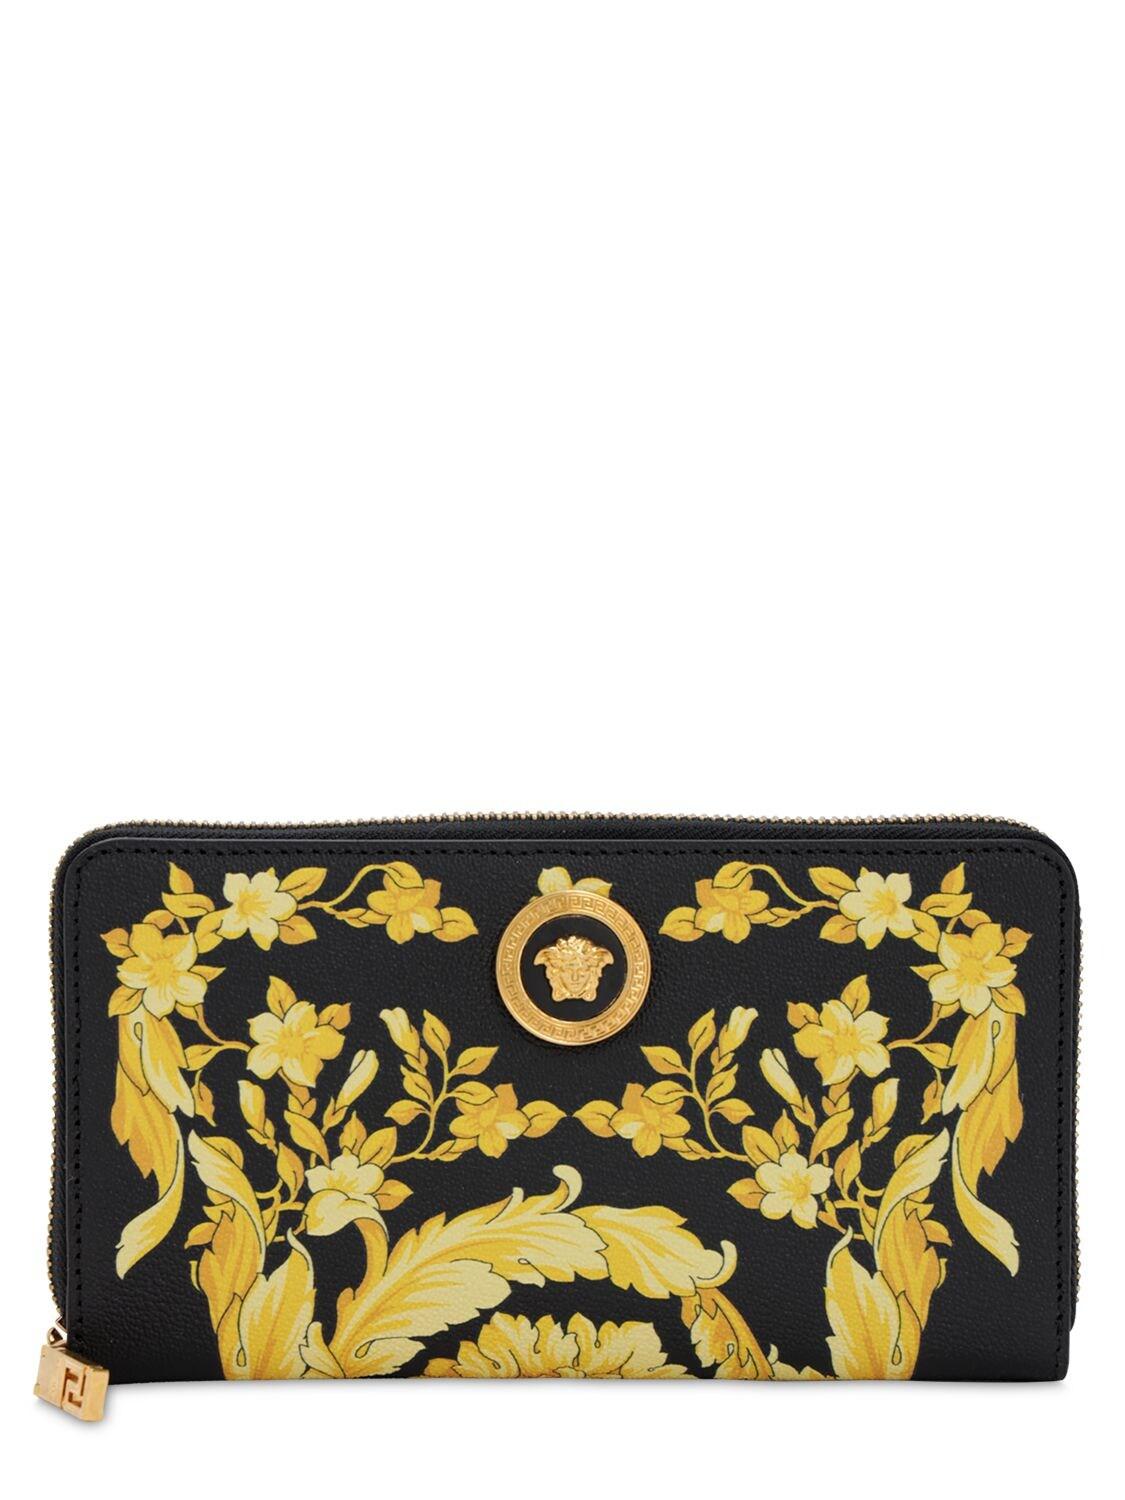 Versace Barocco Print Leather Zip Around Wallet in Black - Save 4% - Lyst